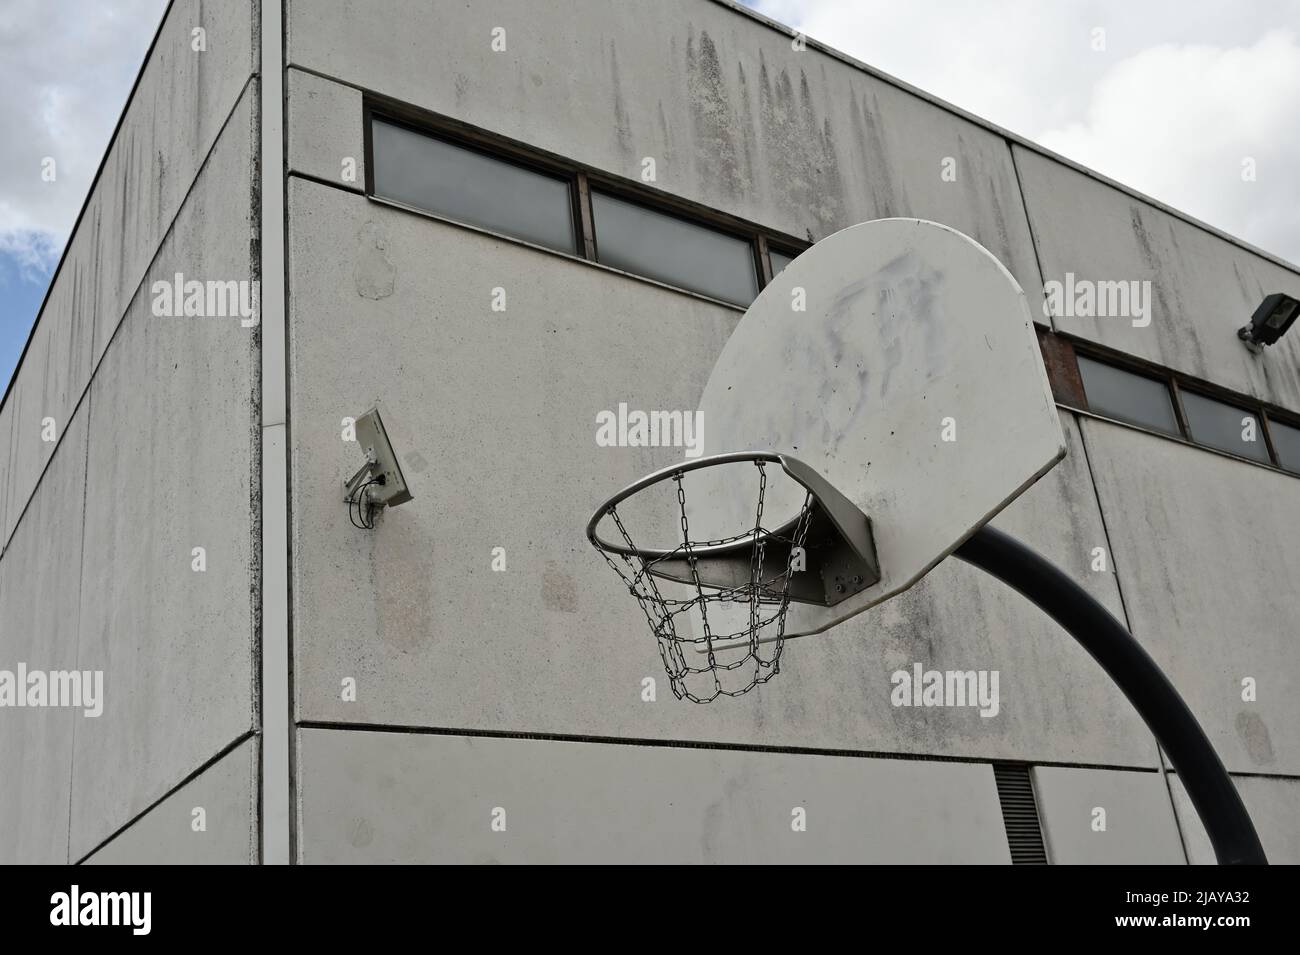 an anti-vandal basketball hoop with iron chains against a gloomy cloudy sky, next to a concrete building with a surveillance camera on the wall Stock Photo